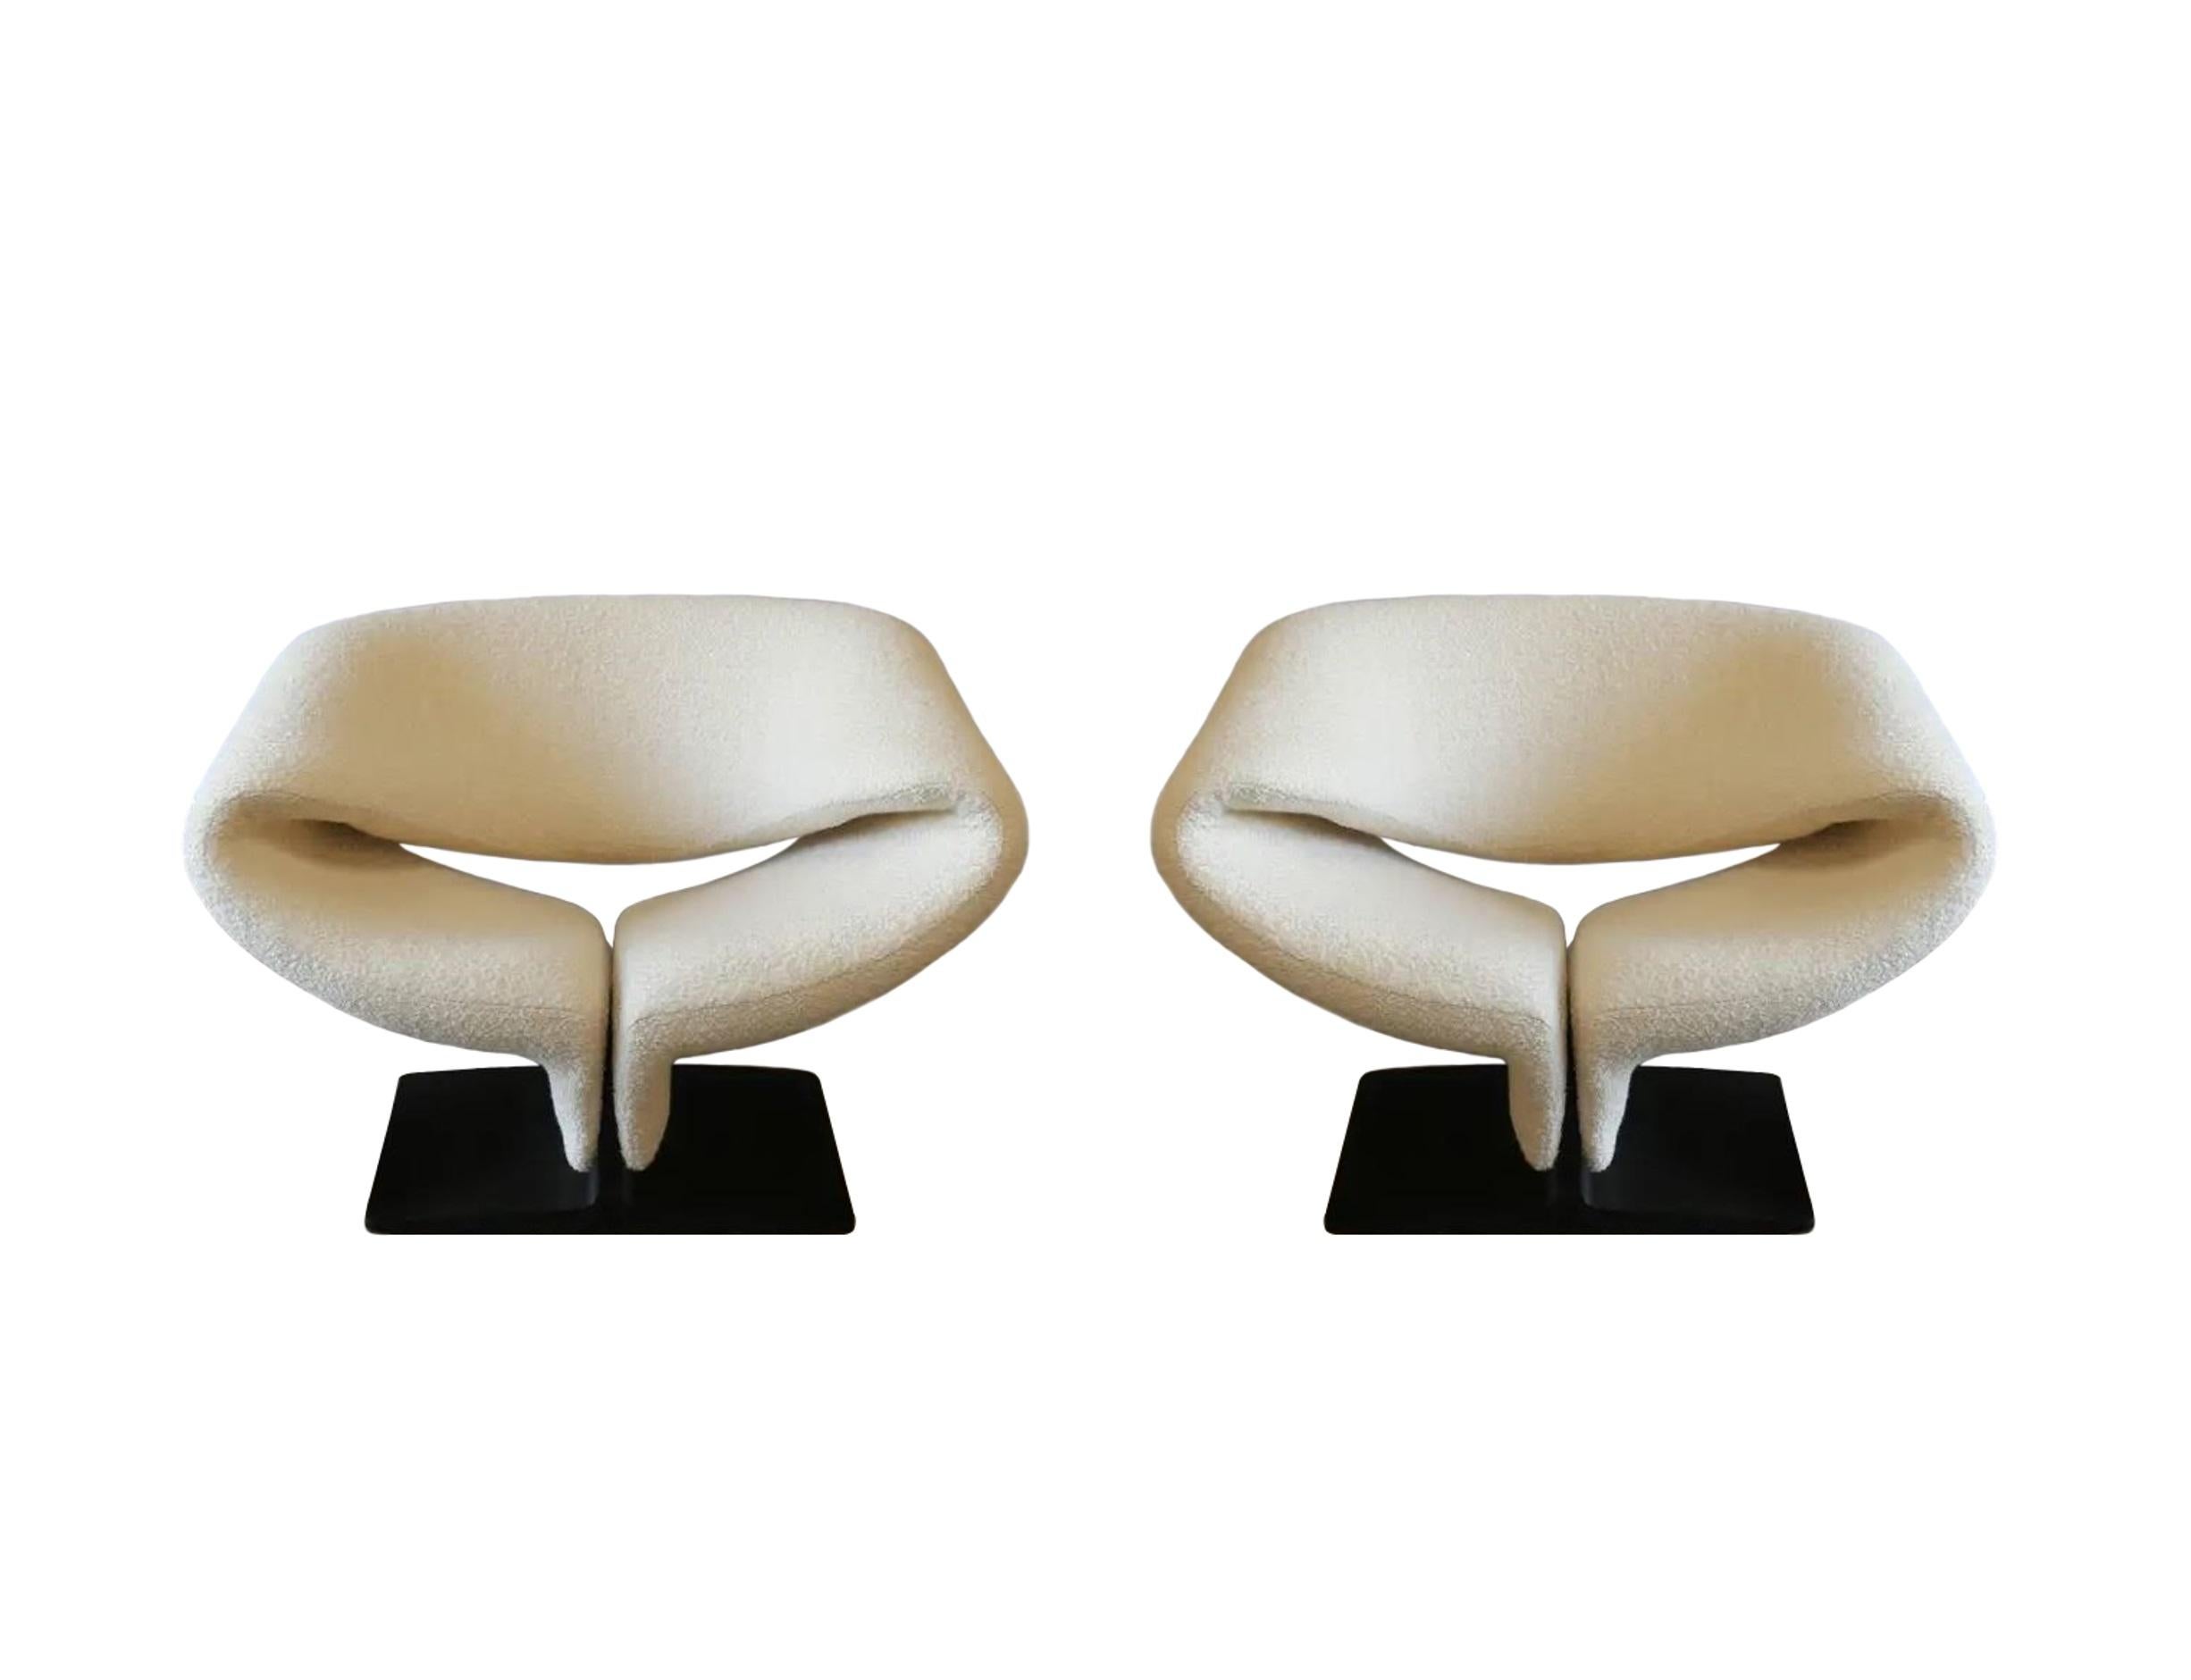 Original pair of ribbon chairs model 582, designed by Pierre Paulin for Artifort. A striking, space-age form with curving planes. Incredible swooping lines and contoured shape. Perhaps the most comfortable seating solution in the world, the Ribbon